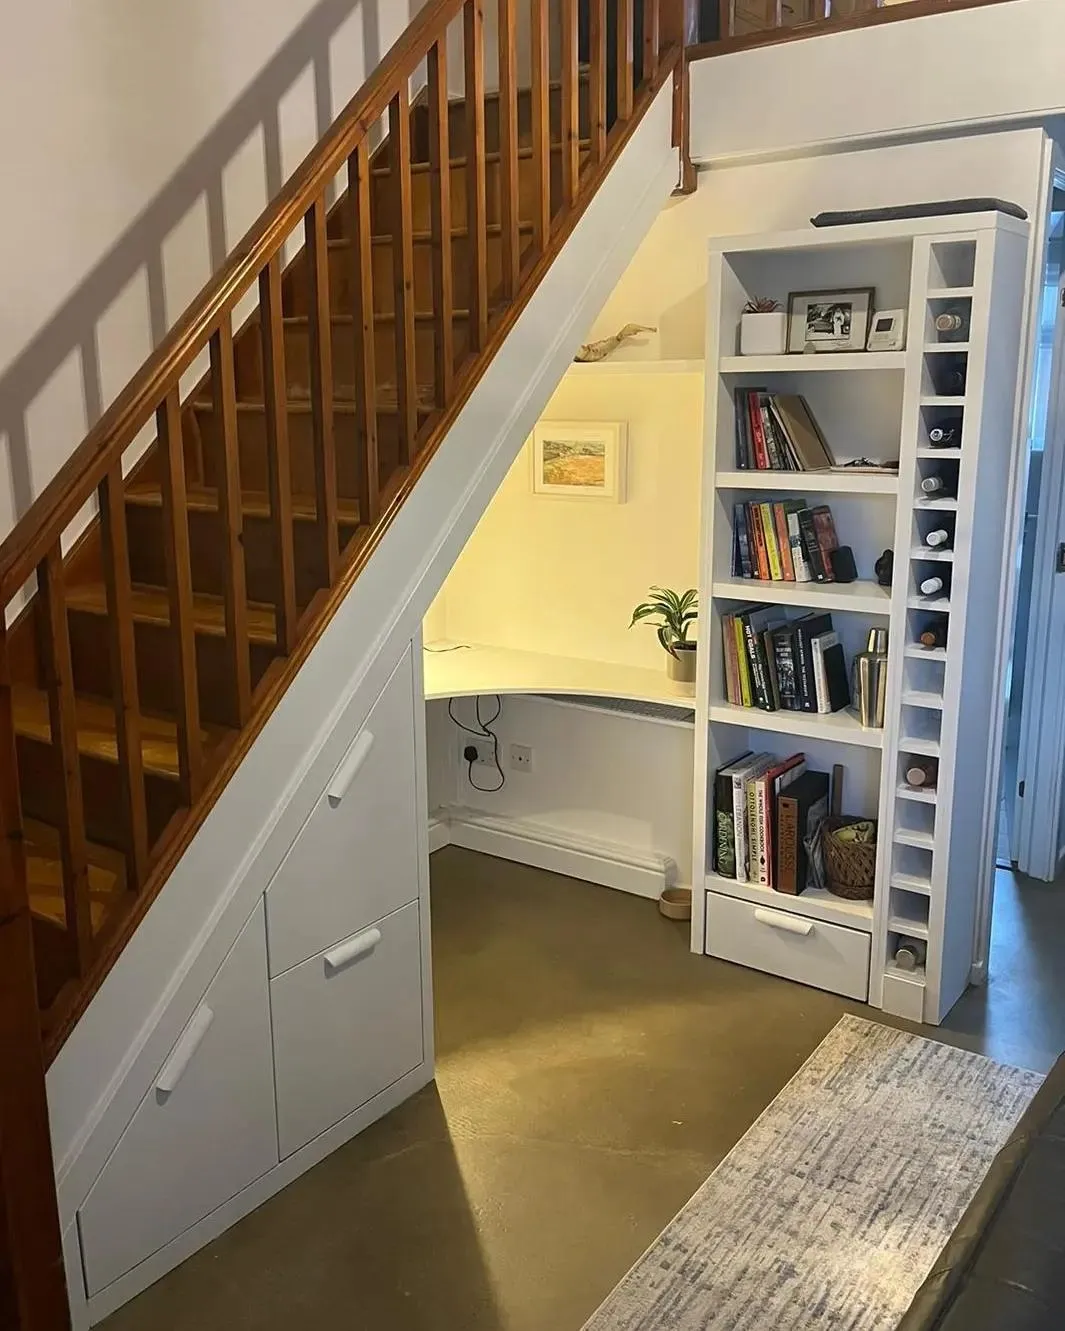 Smart under-stair storage solution with a built-in white desk and bookshelves, custom-crafted by a West Midlands joinery expert, featuring clean lines and efficient use of space, with practical cupboards and display shelves to organize books and decor, enhancing the functionality of a UK home's entryway.